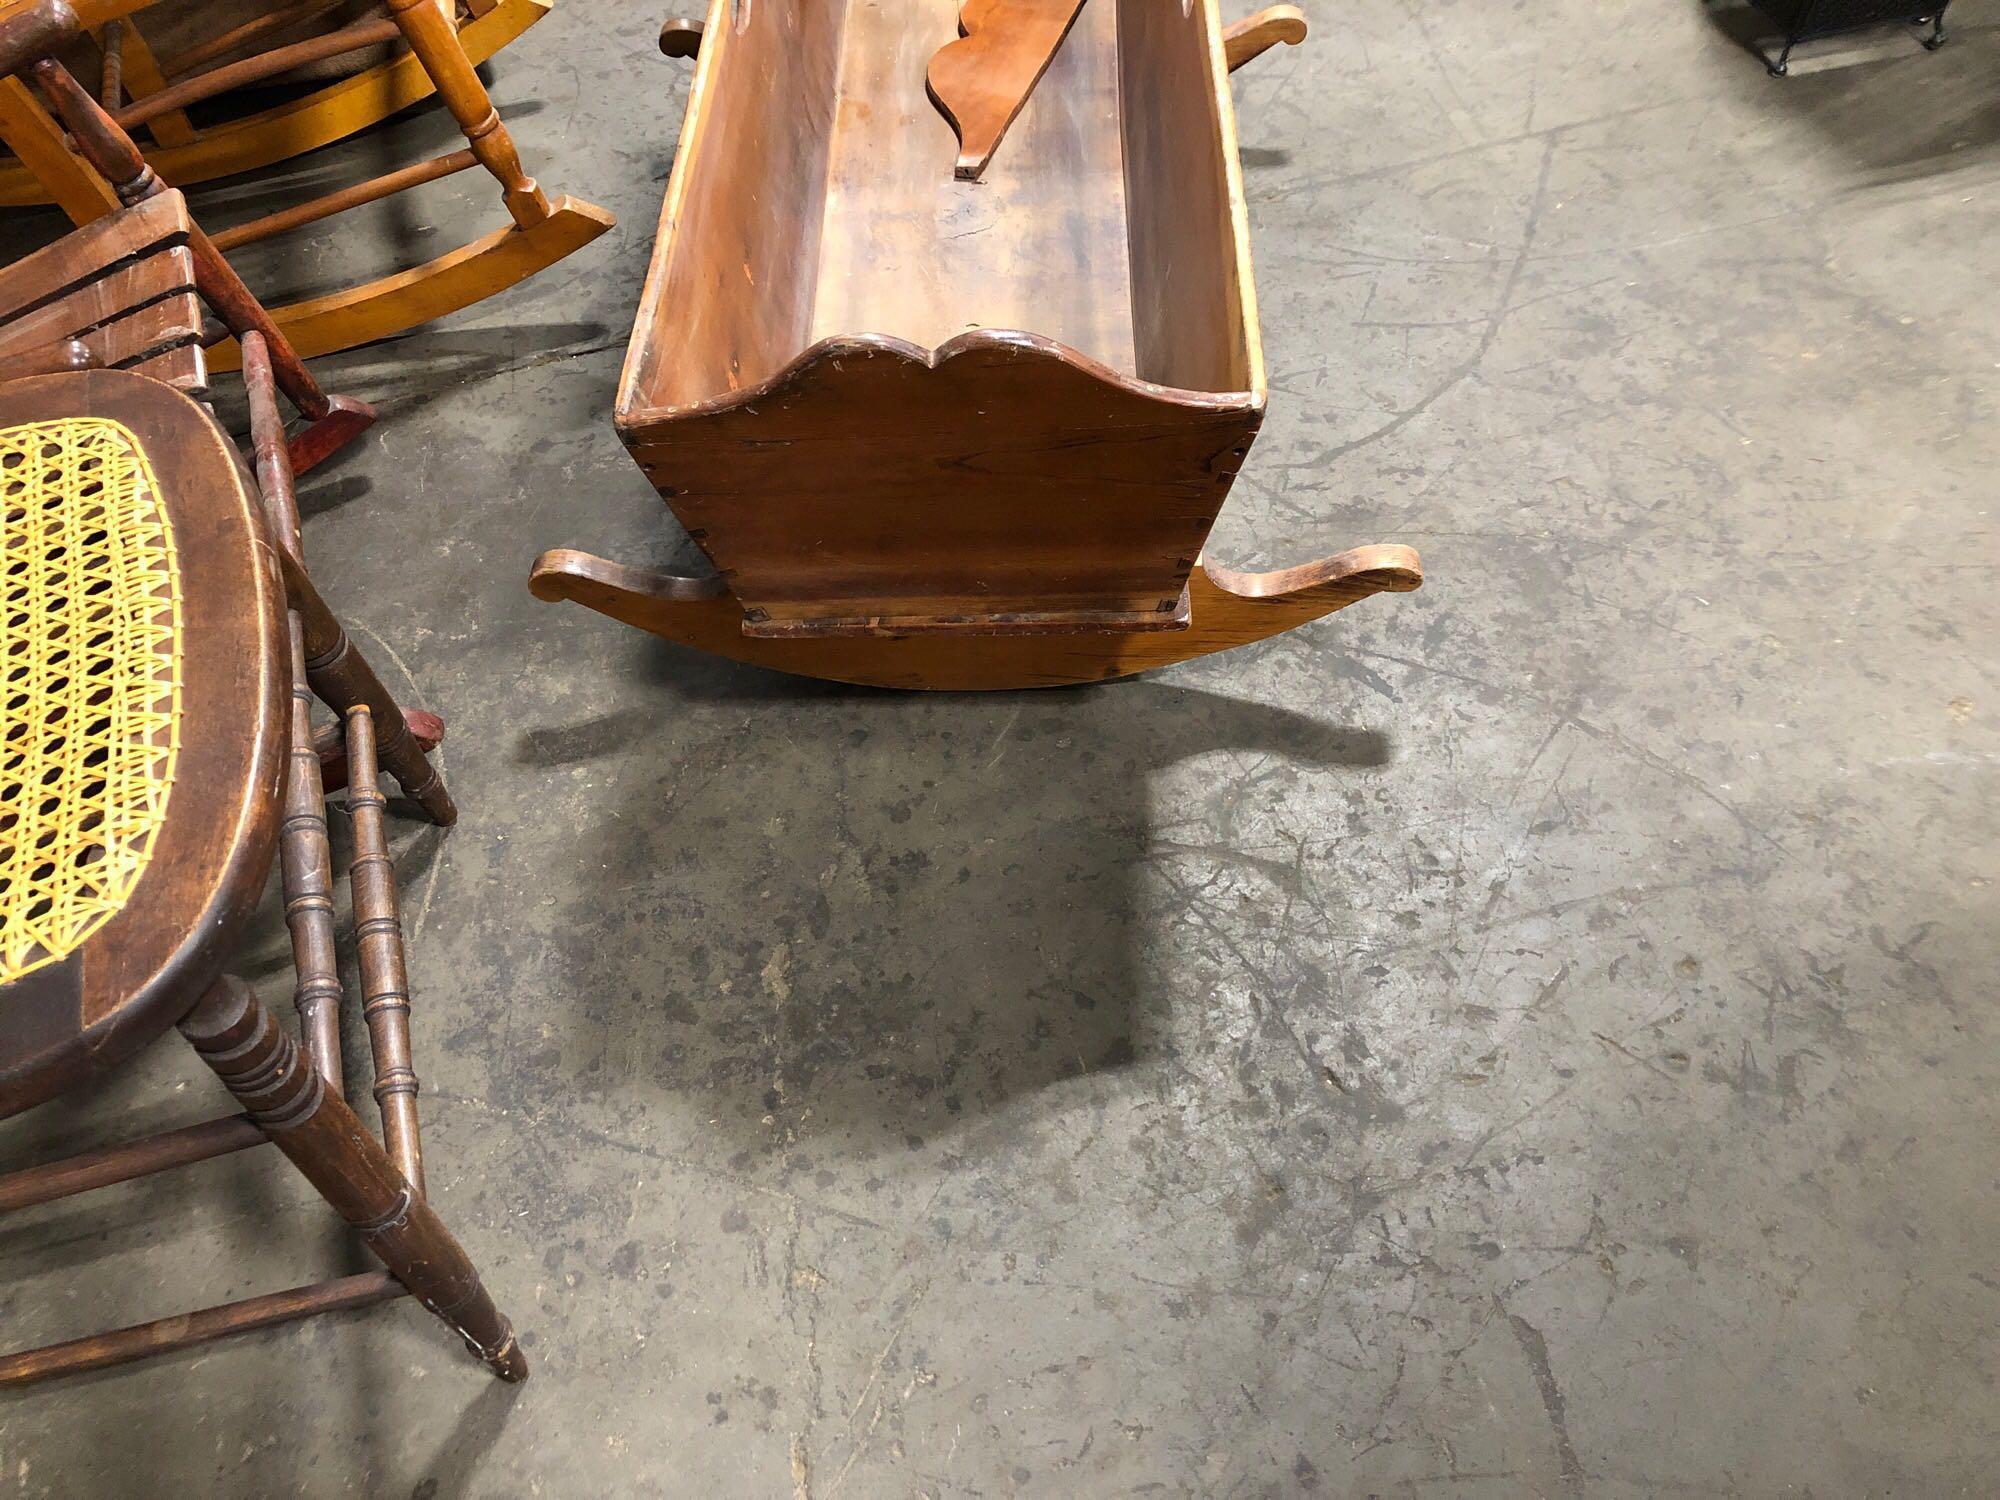 Baby Doll Cradle